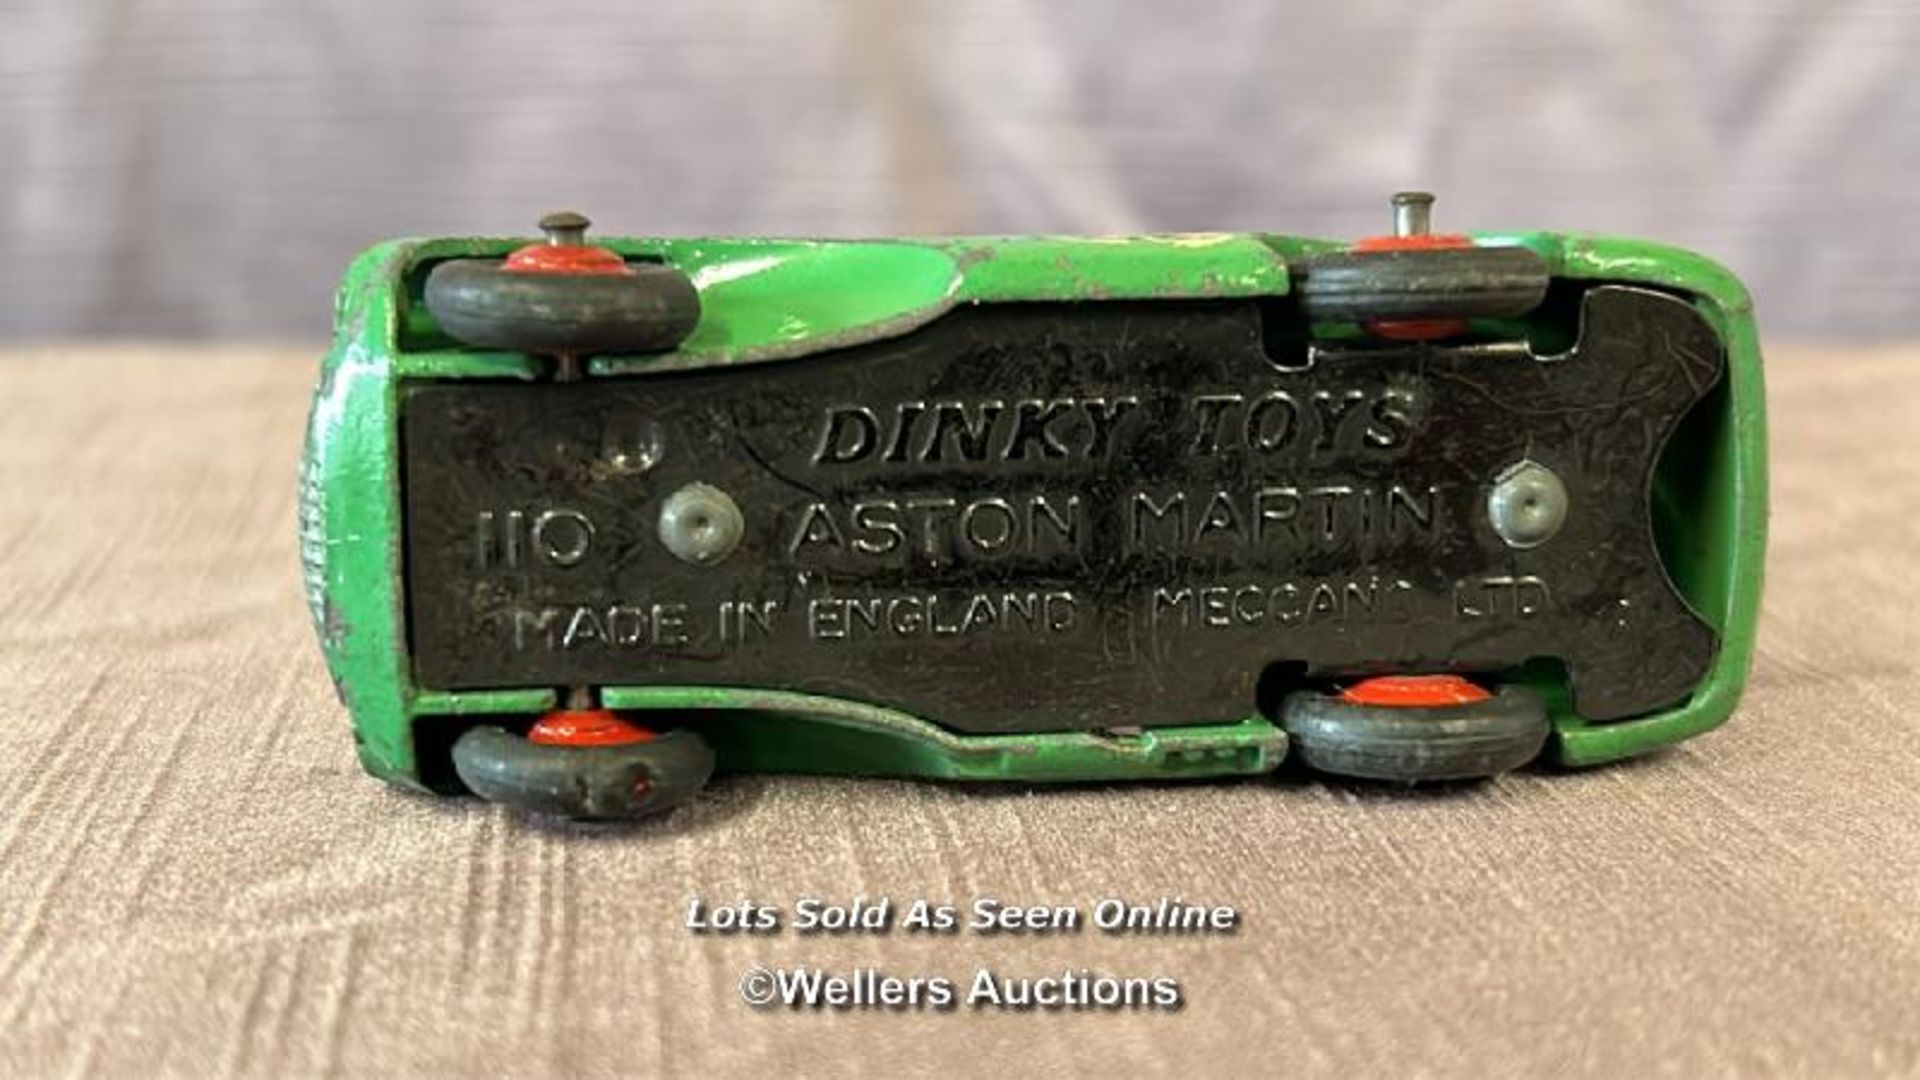 THREE DINKY DIE CAST RACING CARS INCLUDING SUNBEAM ALPINE NO. 107, AUSTIN HEALEY NO. 109 AND ASTON - Image 5 of 7